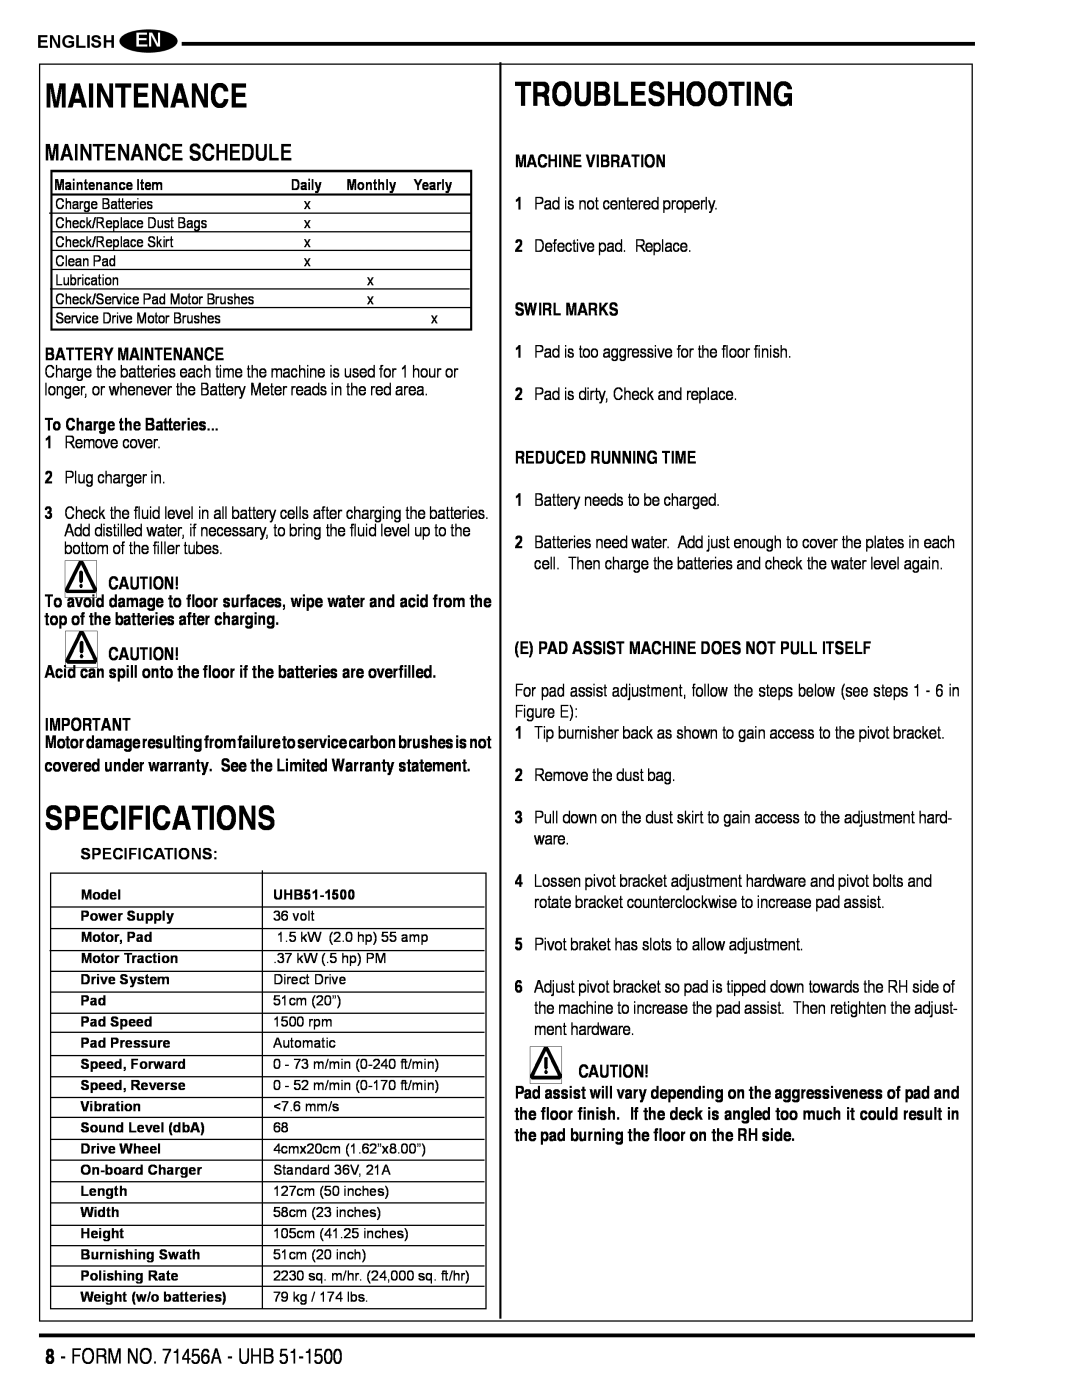 Nilfisk-Advance America 01610A manual Specifications, Troubleshooting, Maintenance Schedule, FORM NO. 71456A - UHB 